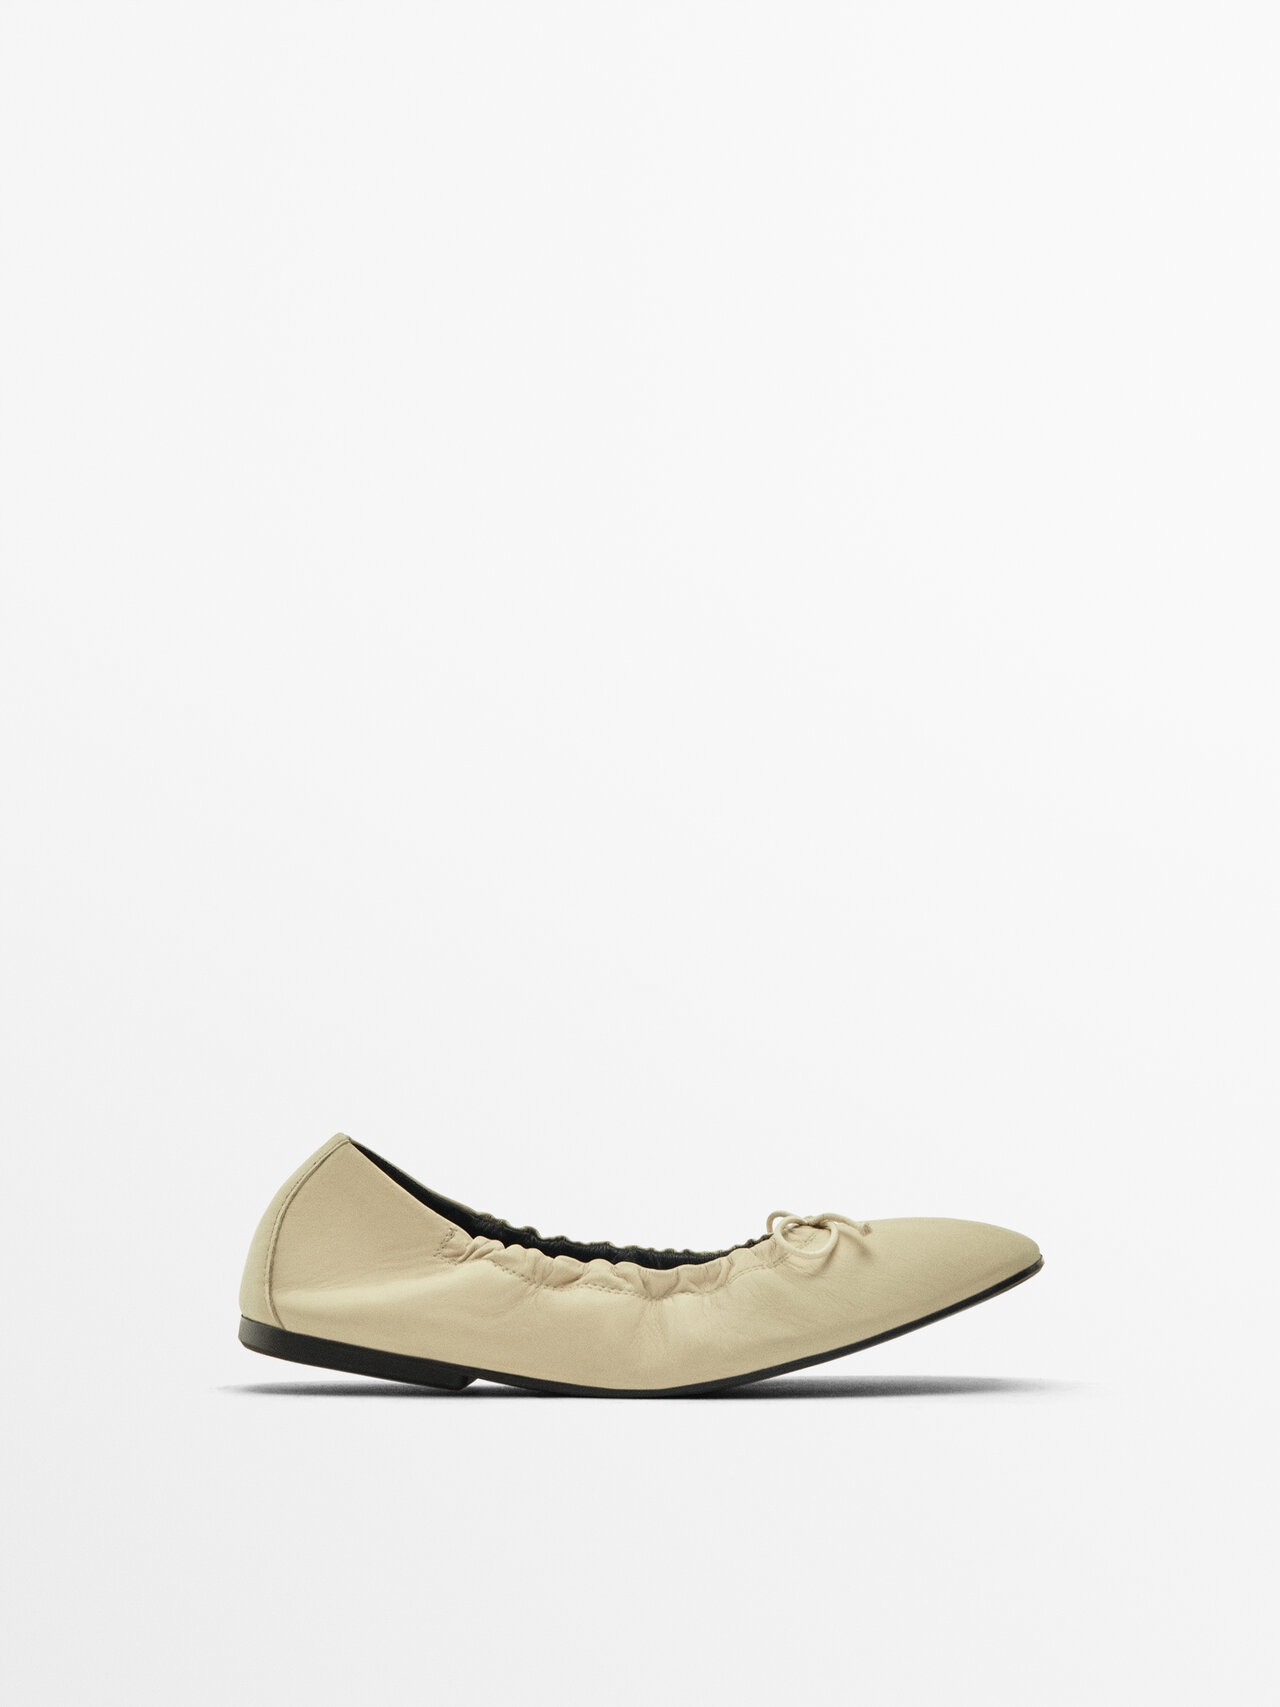 Massimo Dutti Ballet Flats With Gathered Detail In Cream